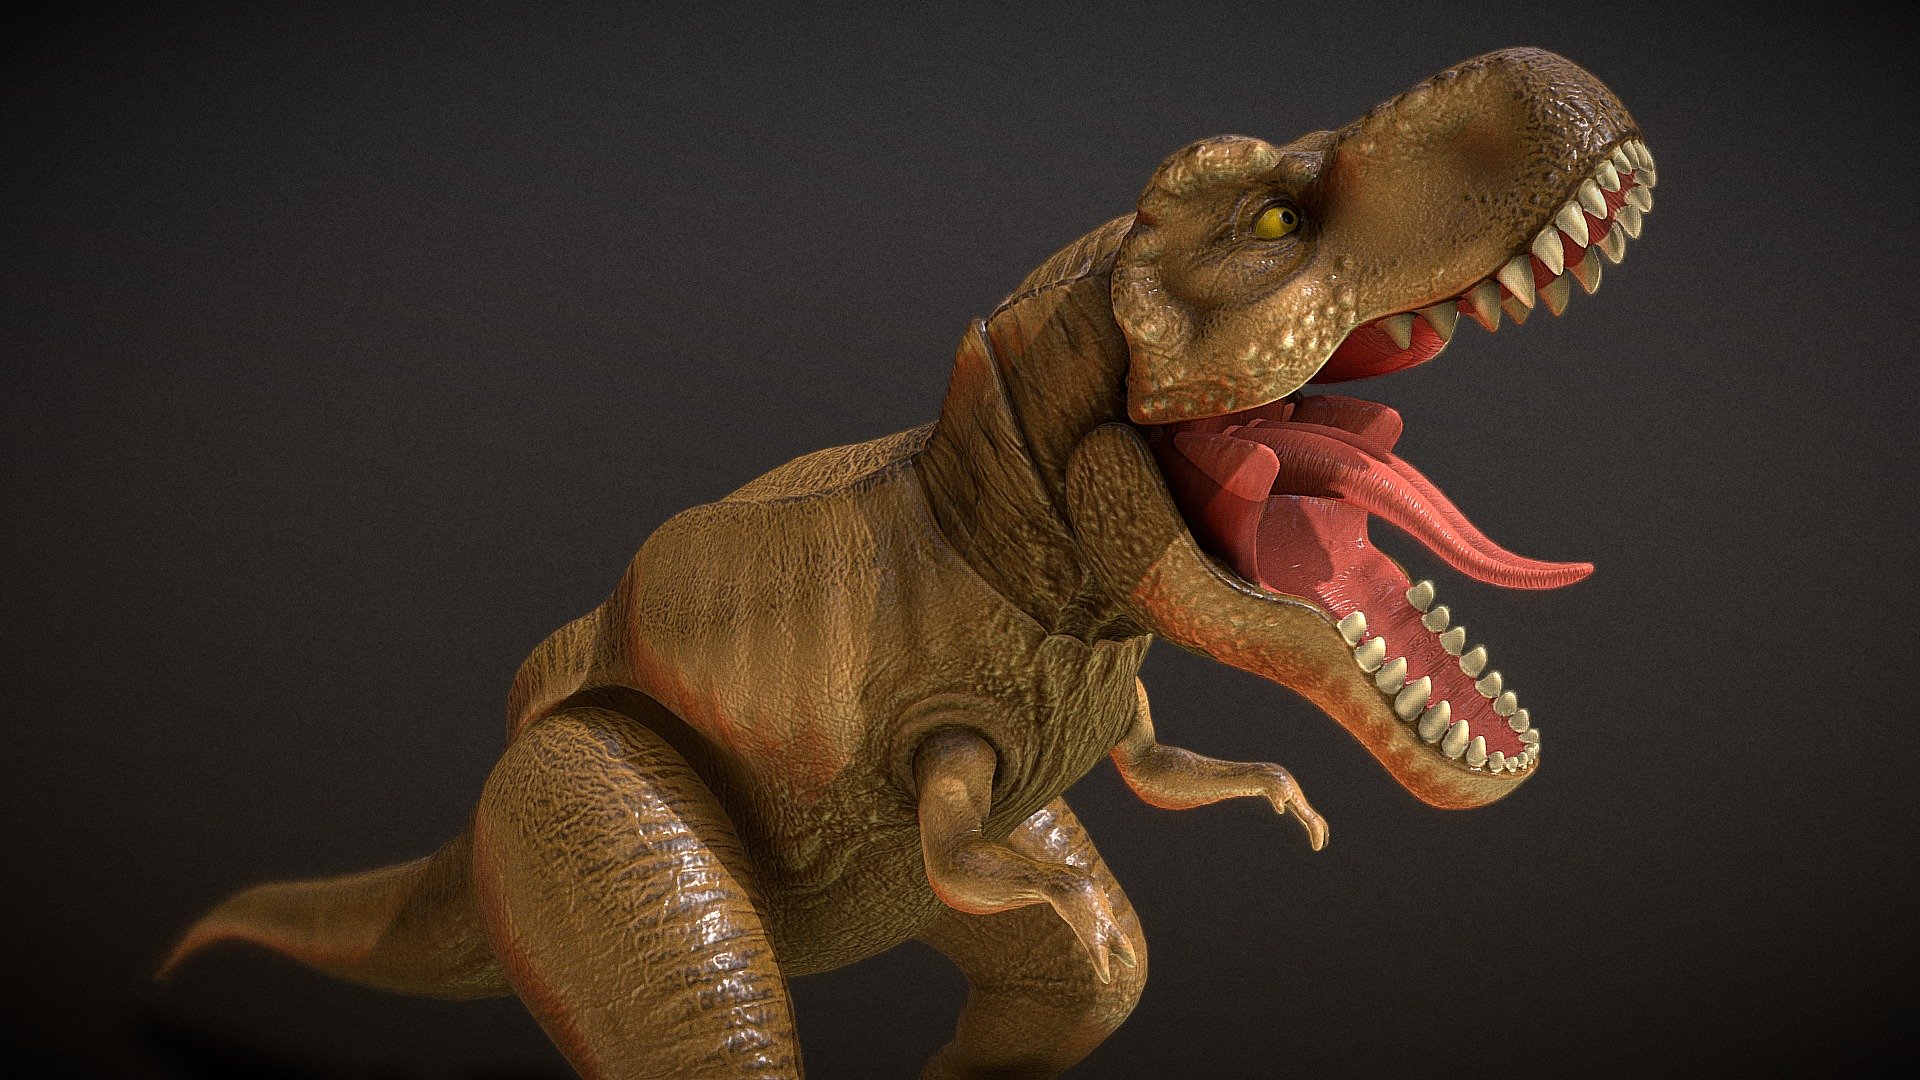 Virtual toy made for Carrefour and http://www.many-worlds.es - Jurassic world T-rex, Many-worlds - 3D model by Guillermo Momplet (@momplet) 3d model